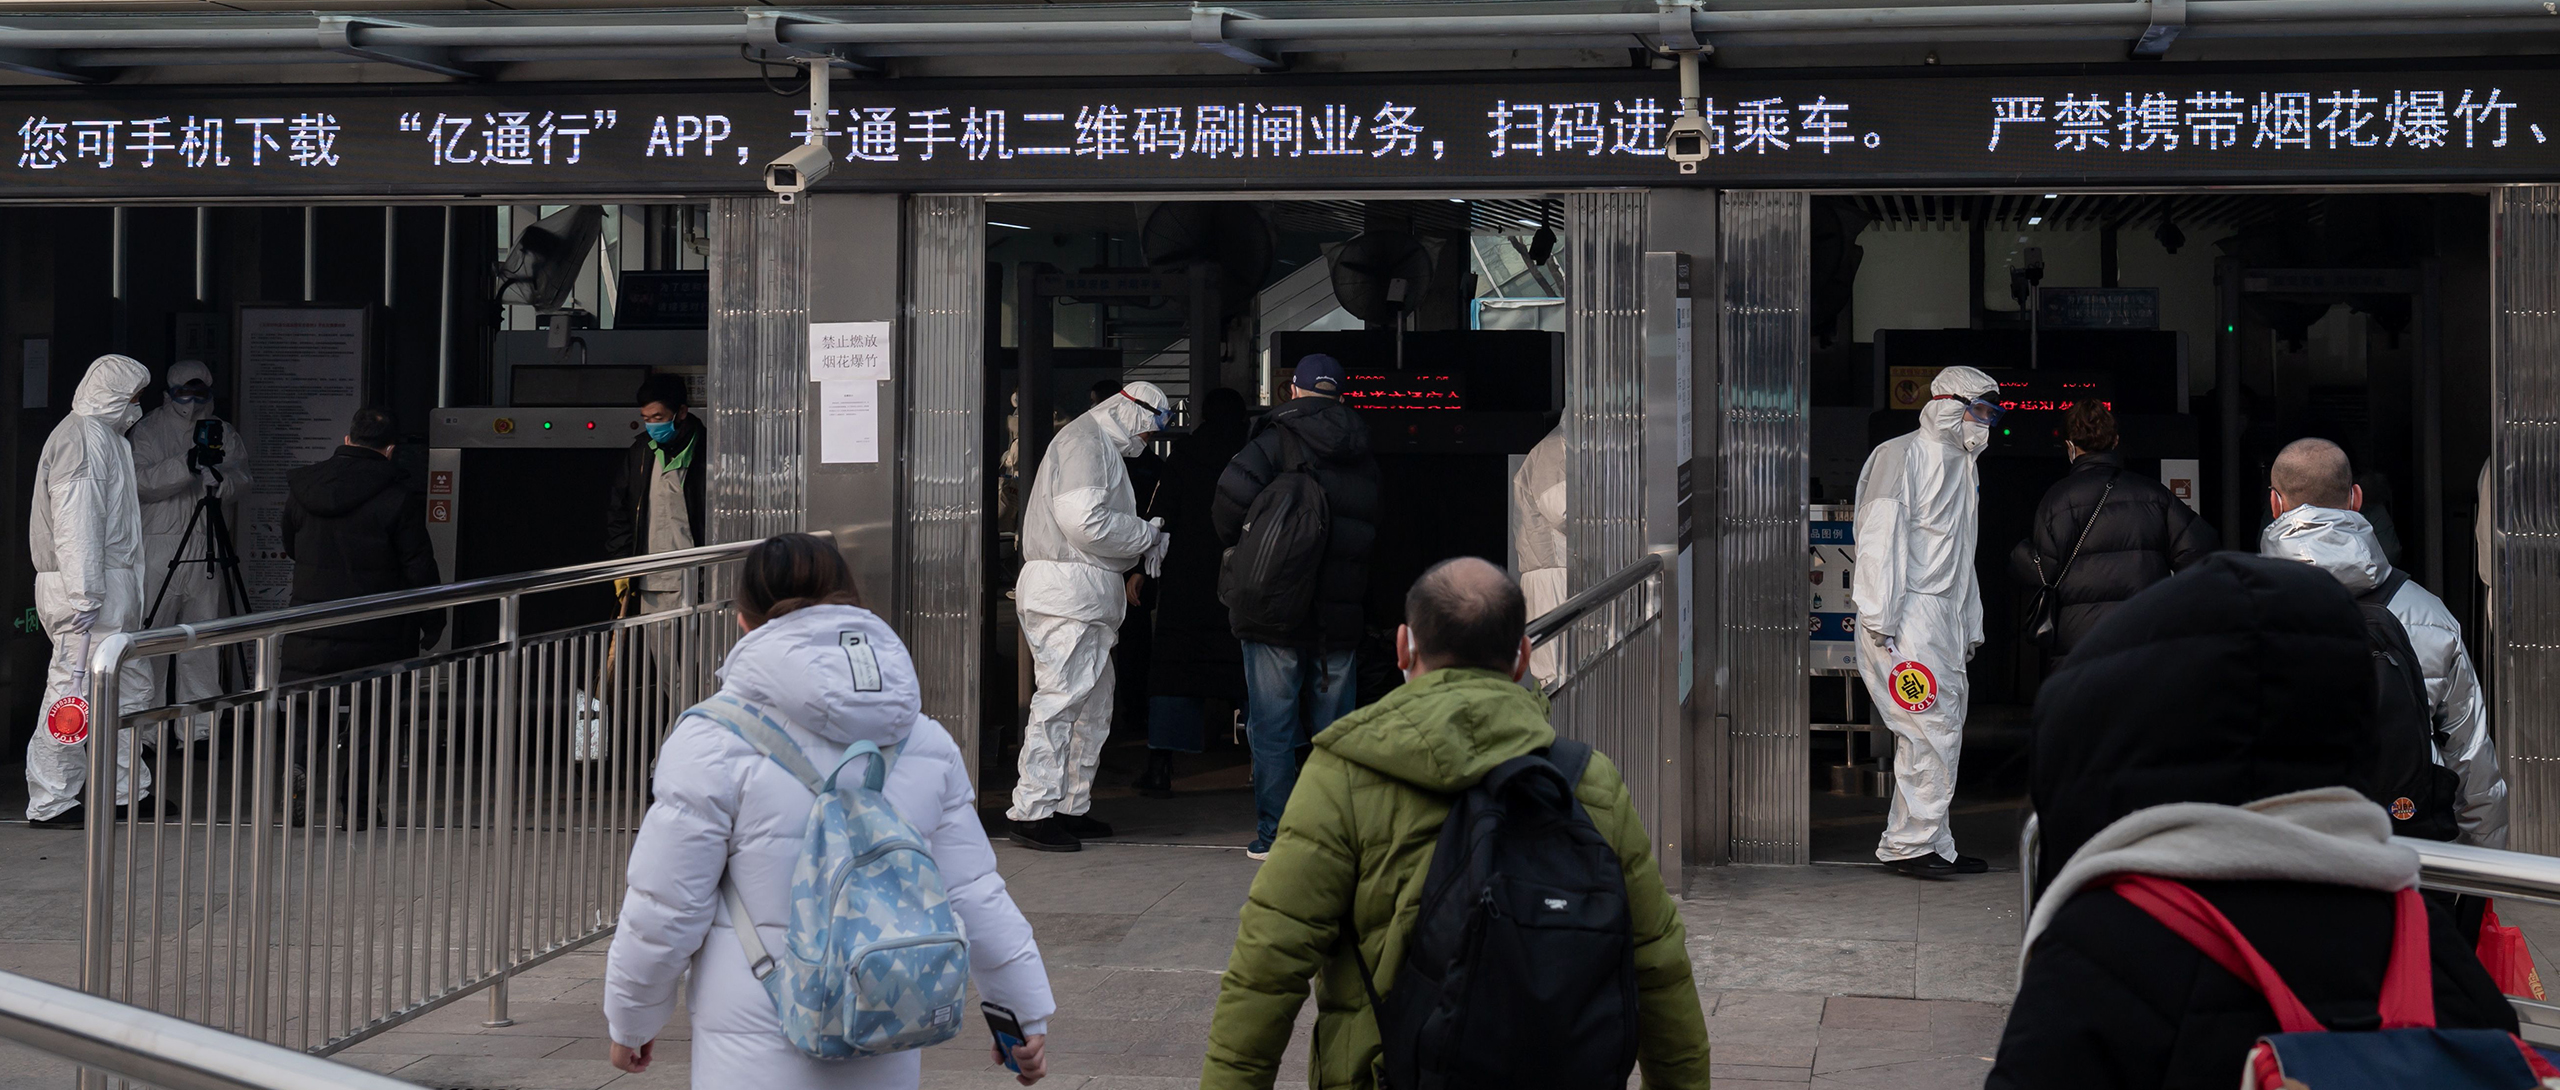 Photo showing security personnel wearing protective clothing check the temperatures of people entering a subway station in Beijing in January 2020 as part of the country's strict "zero COVID" policy. (Nicolas Asfouri/AFP via Getty Images)